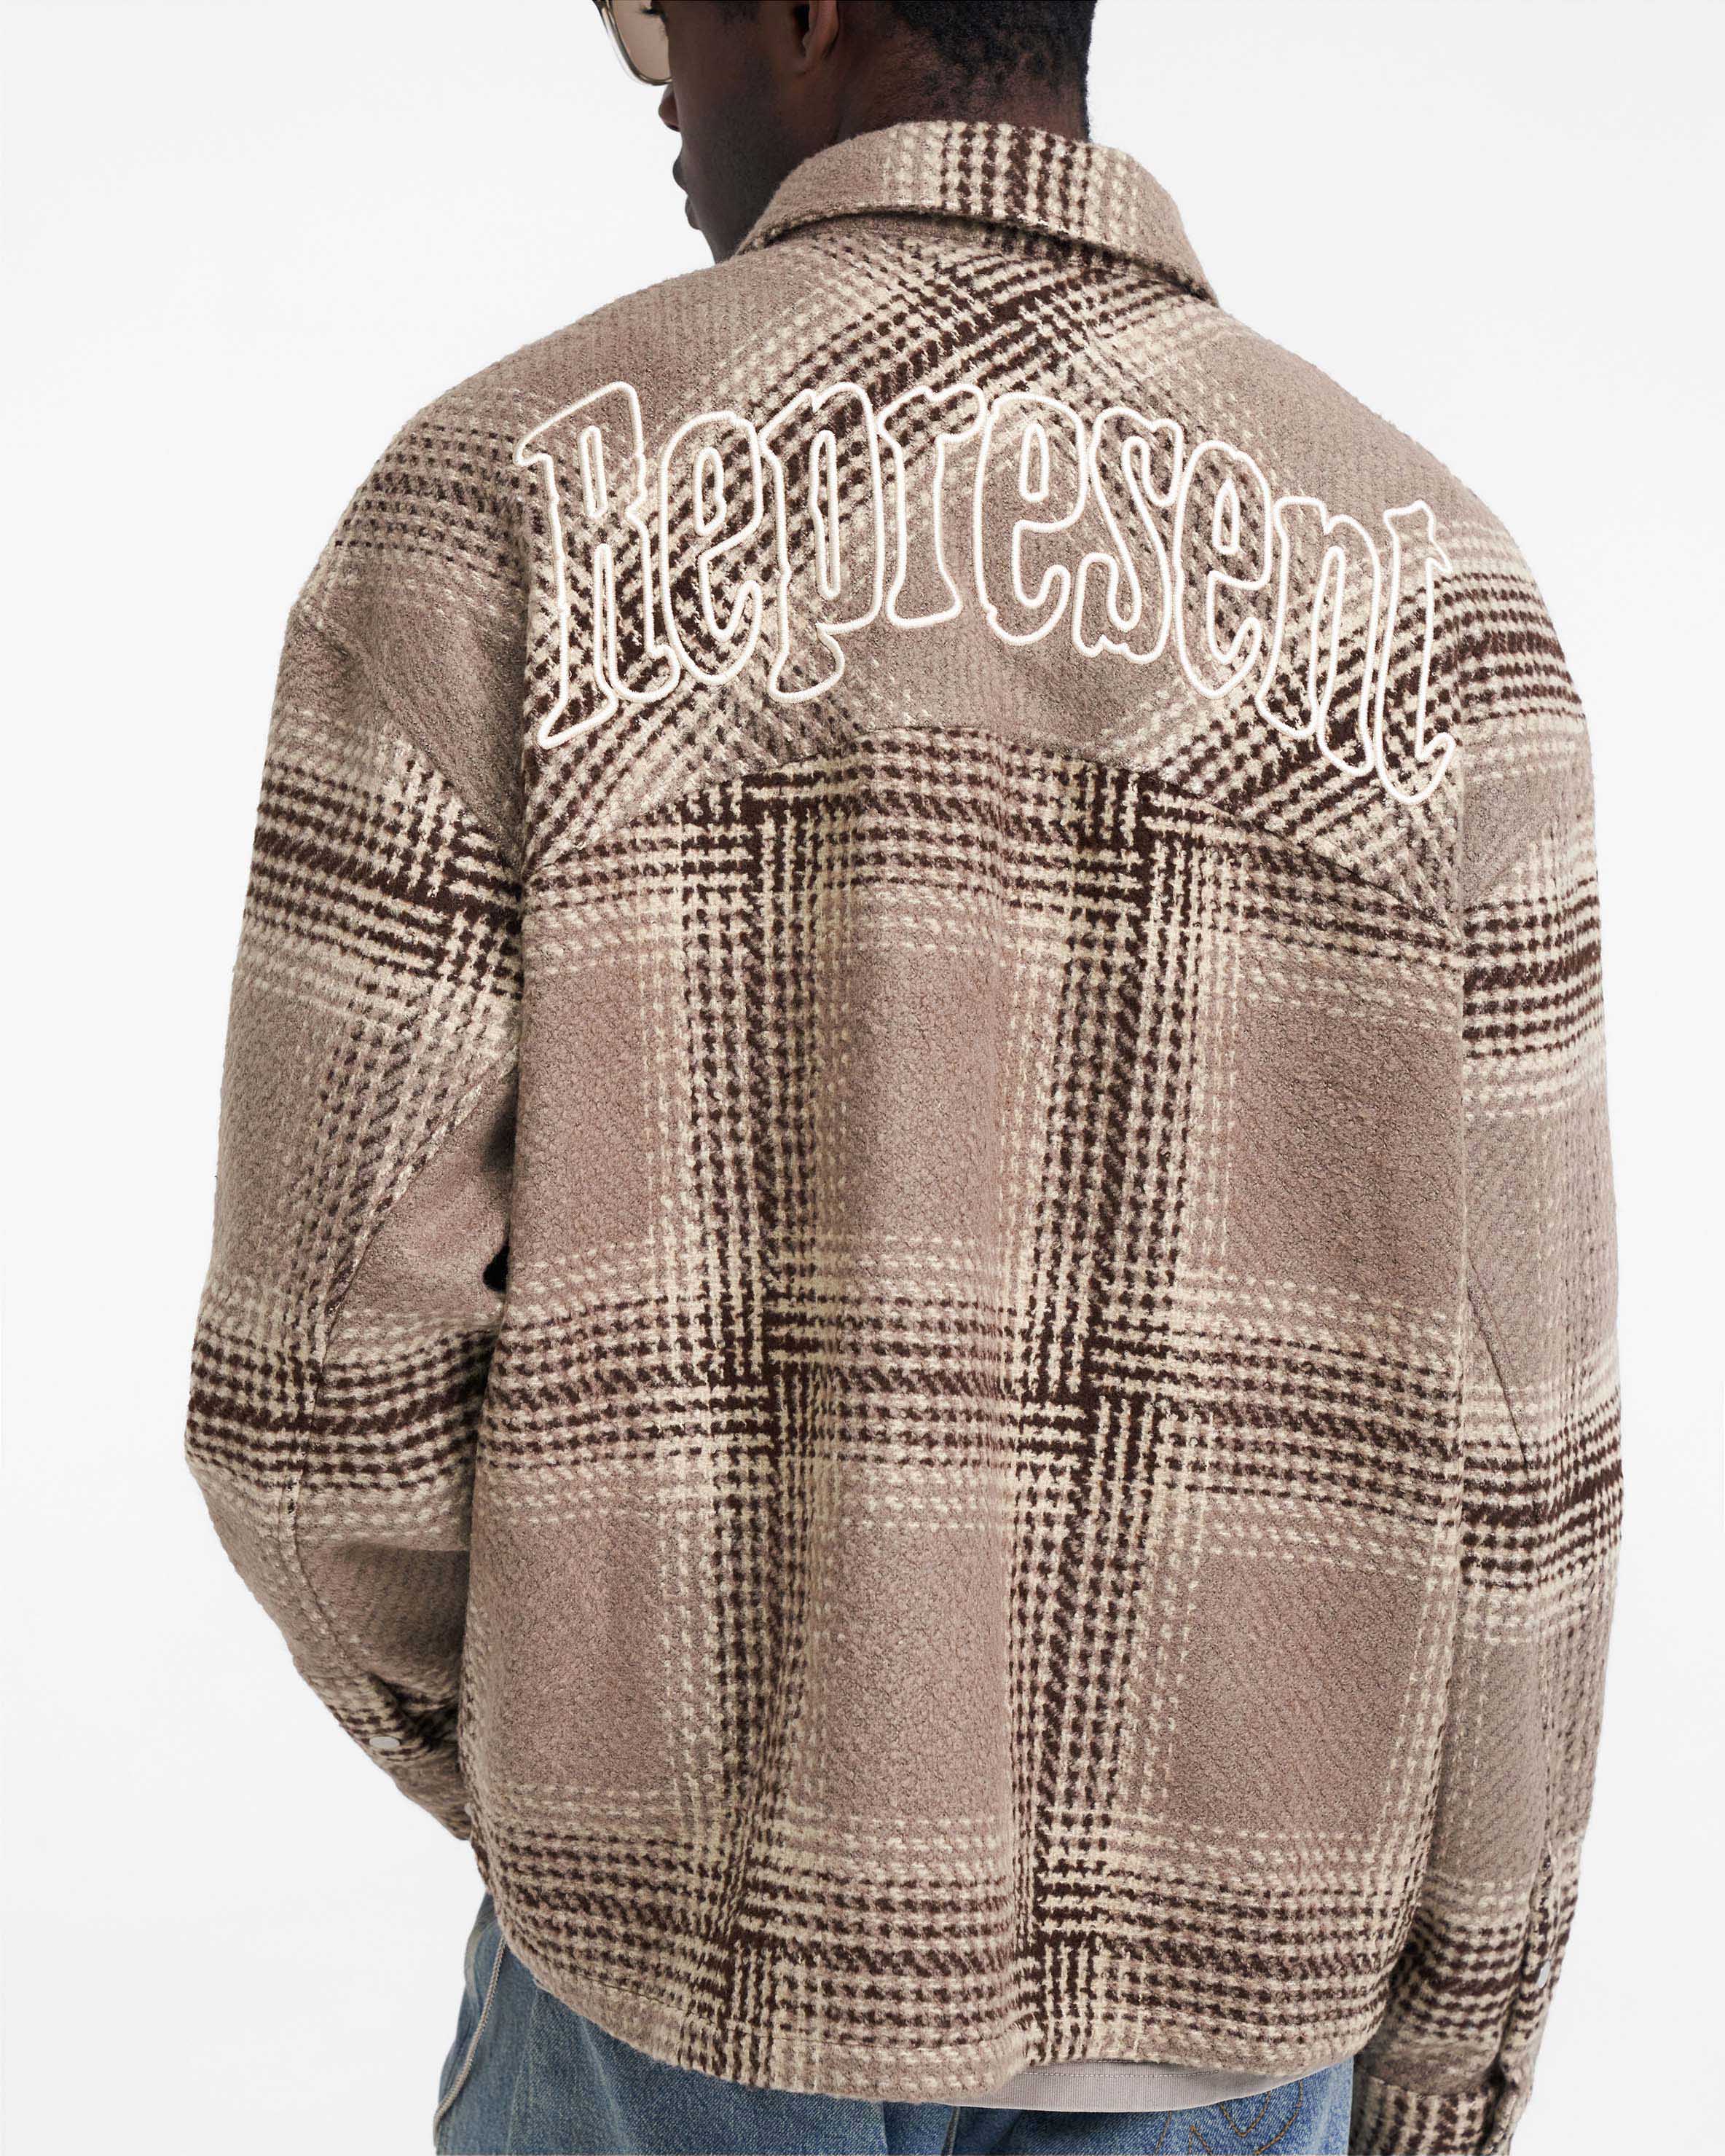 Represent Flannel Shirt - Brown Check